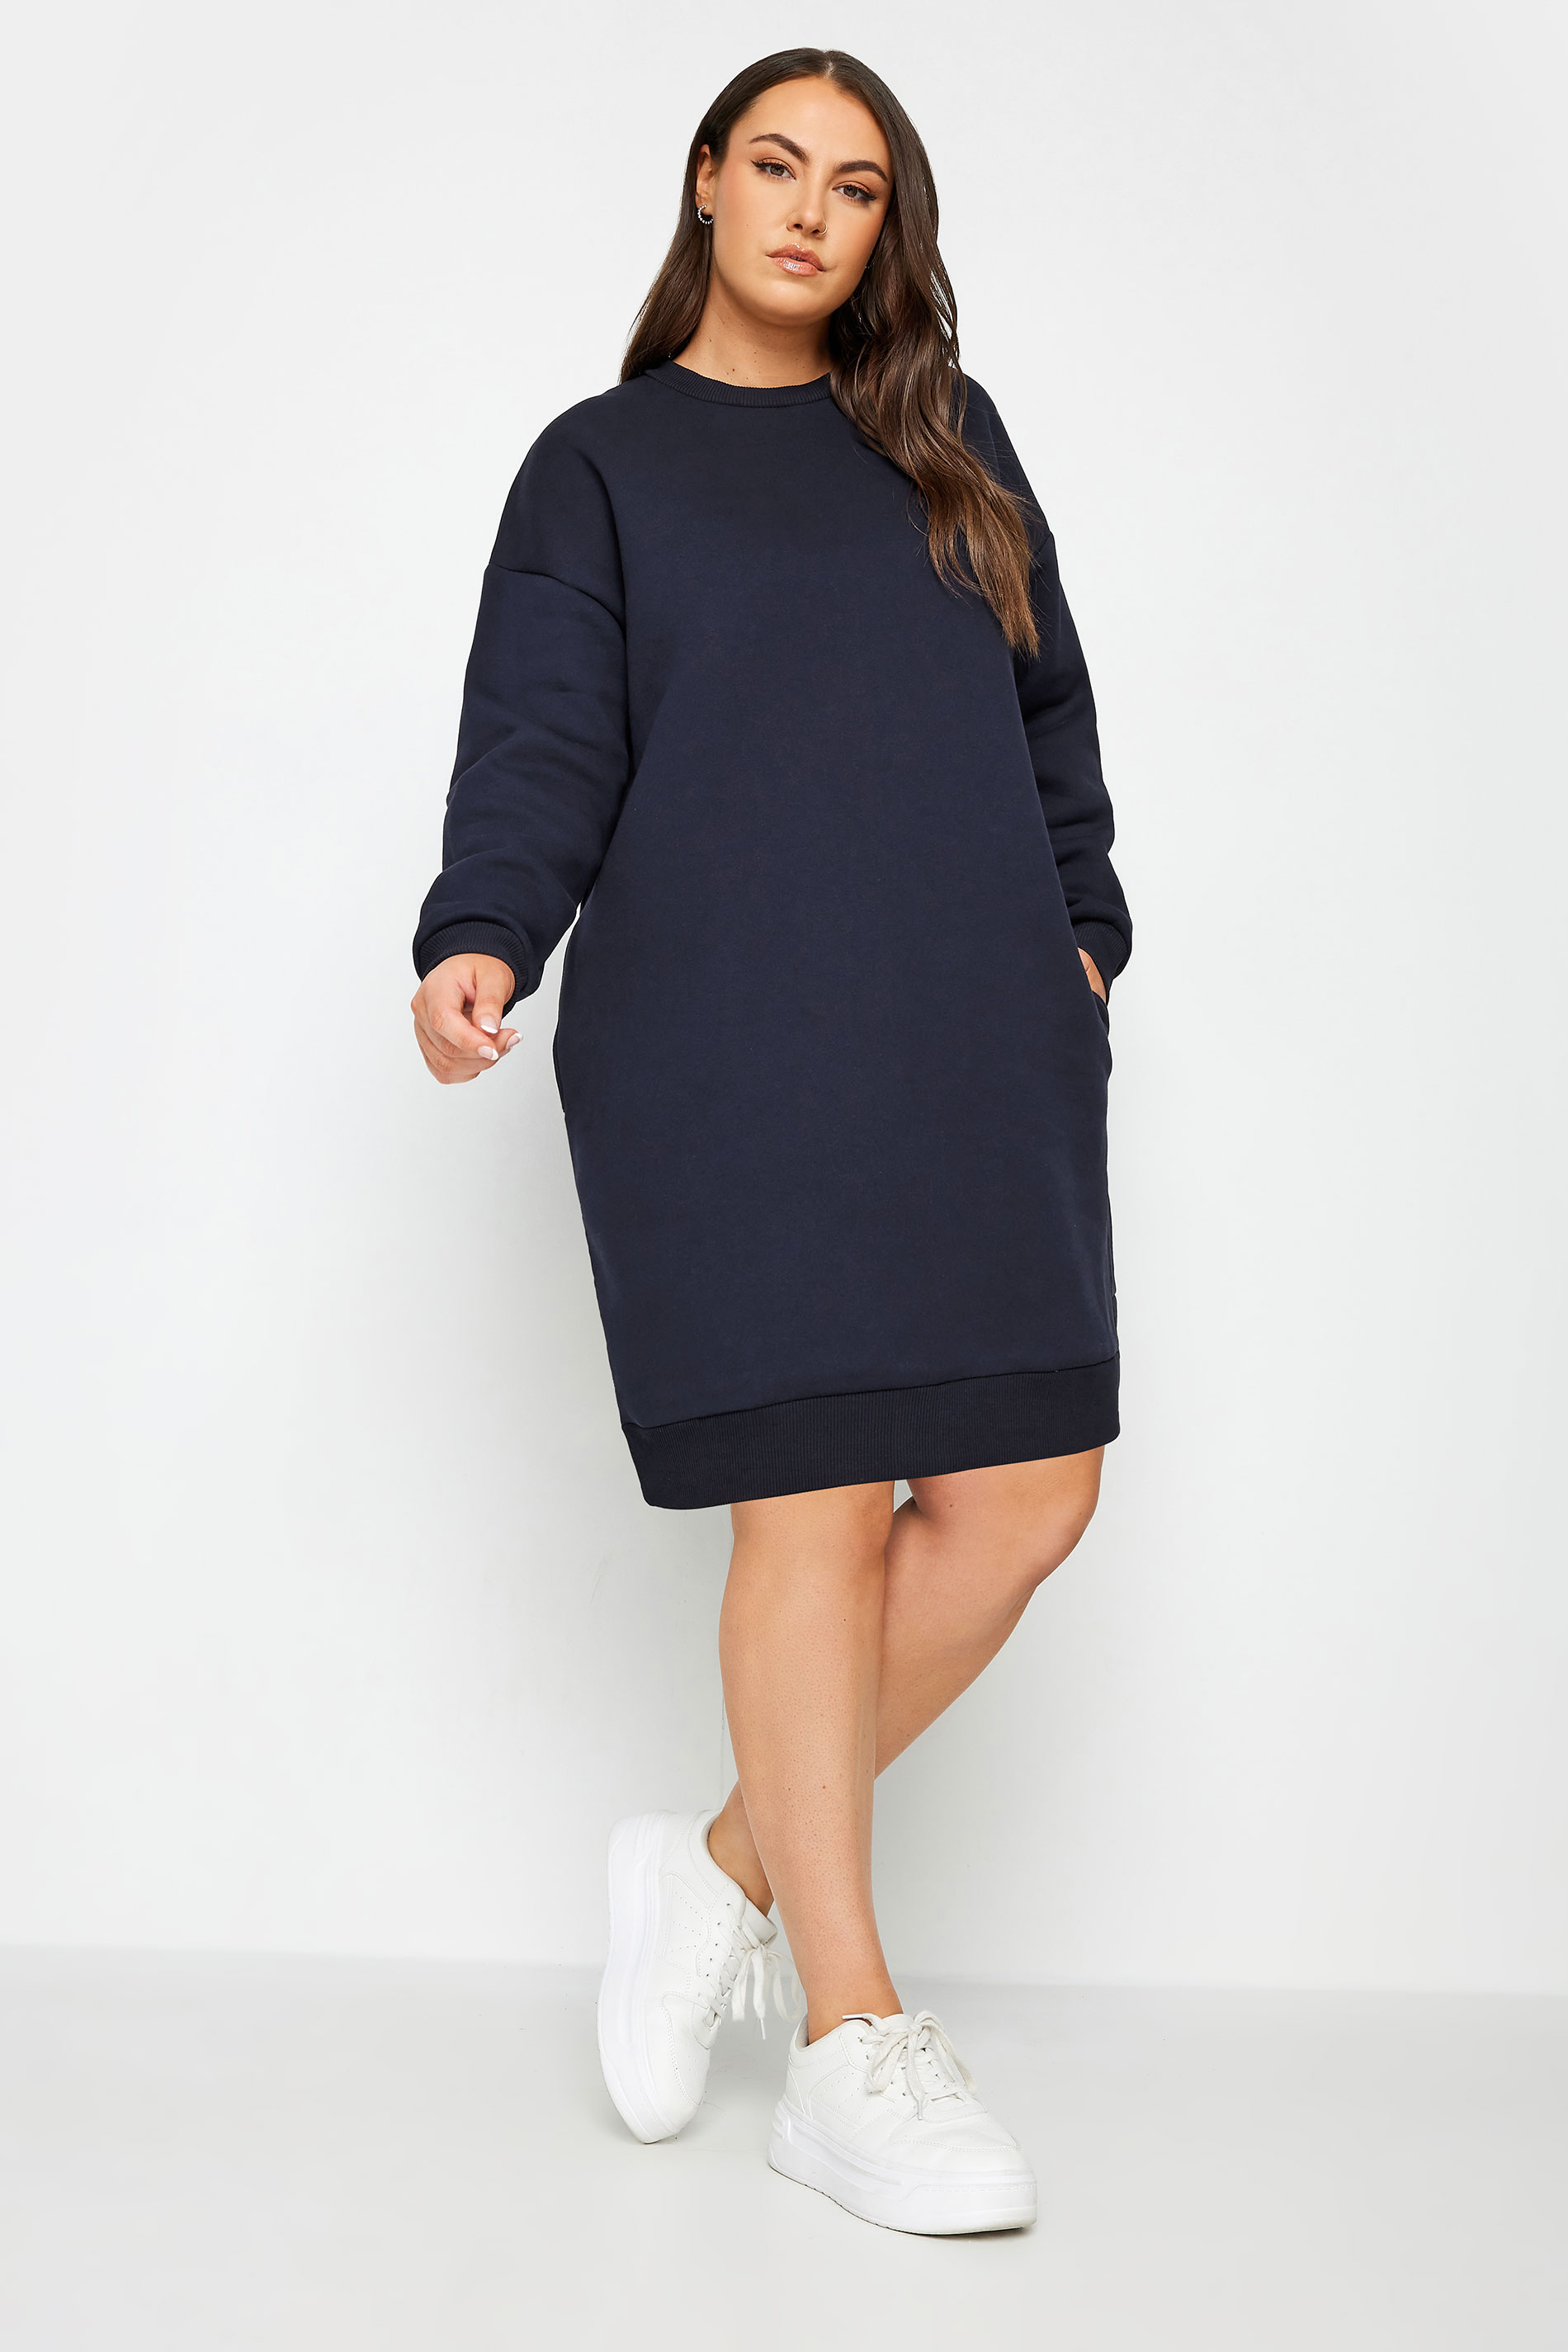 YOURS Plus Size Navy Blue Sweatshirt Dress | Yours Clothing 1